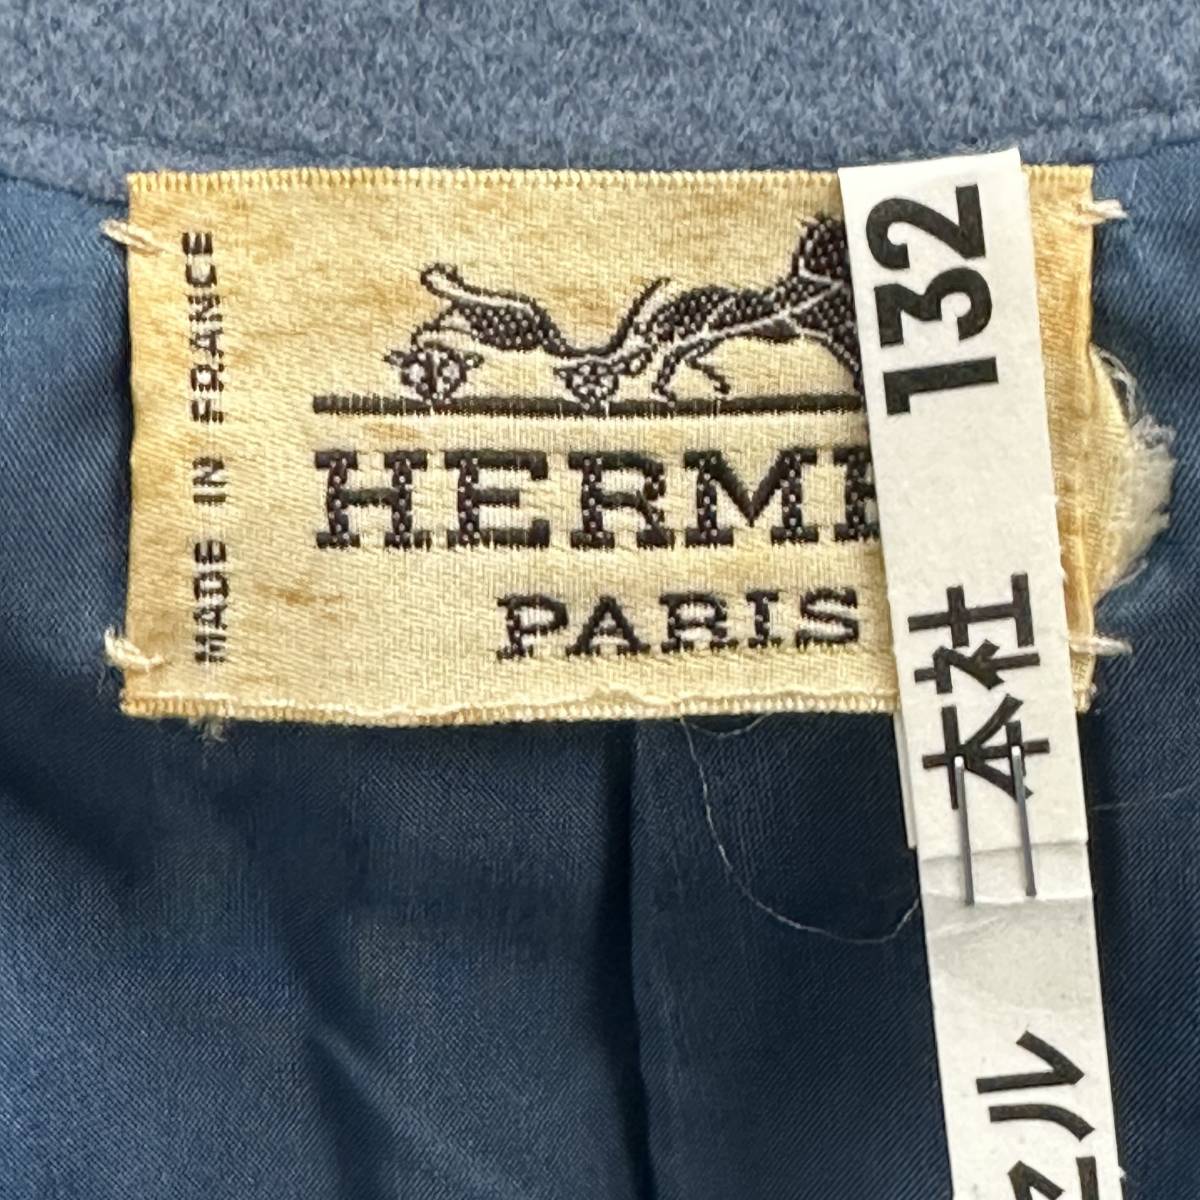  cleaning settled Vintage HERMES Hermes suit 42 top and bottom jacket skirt blue group lady's 